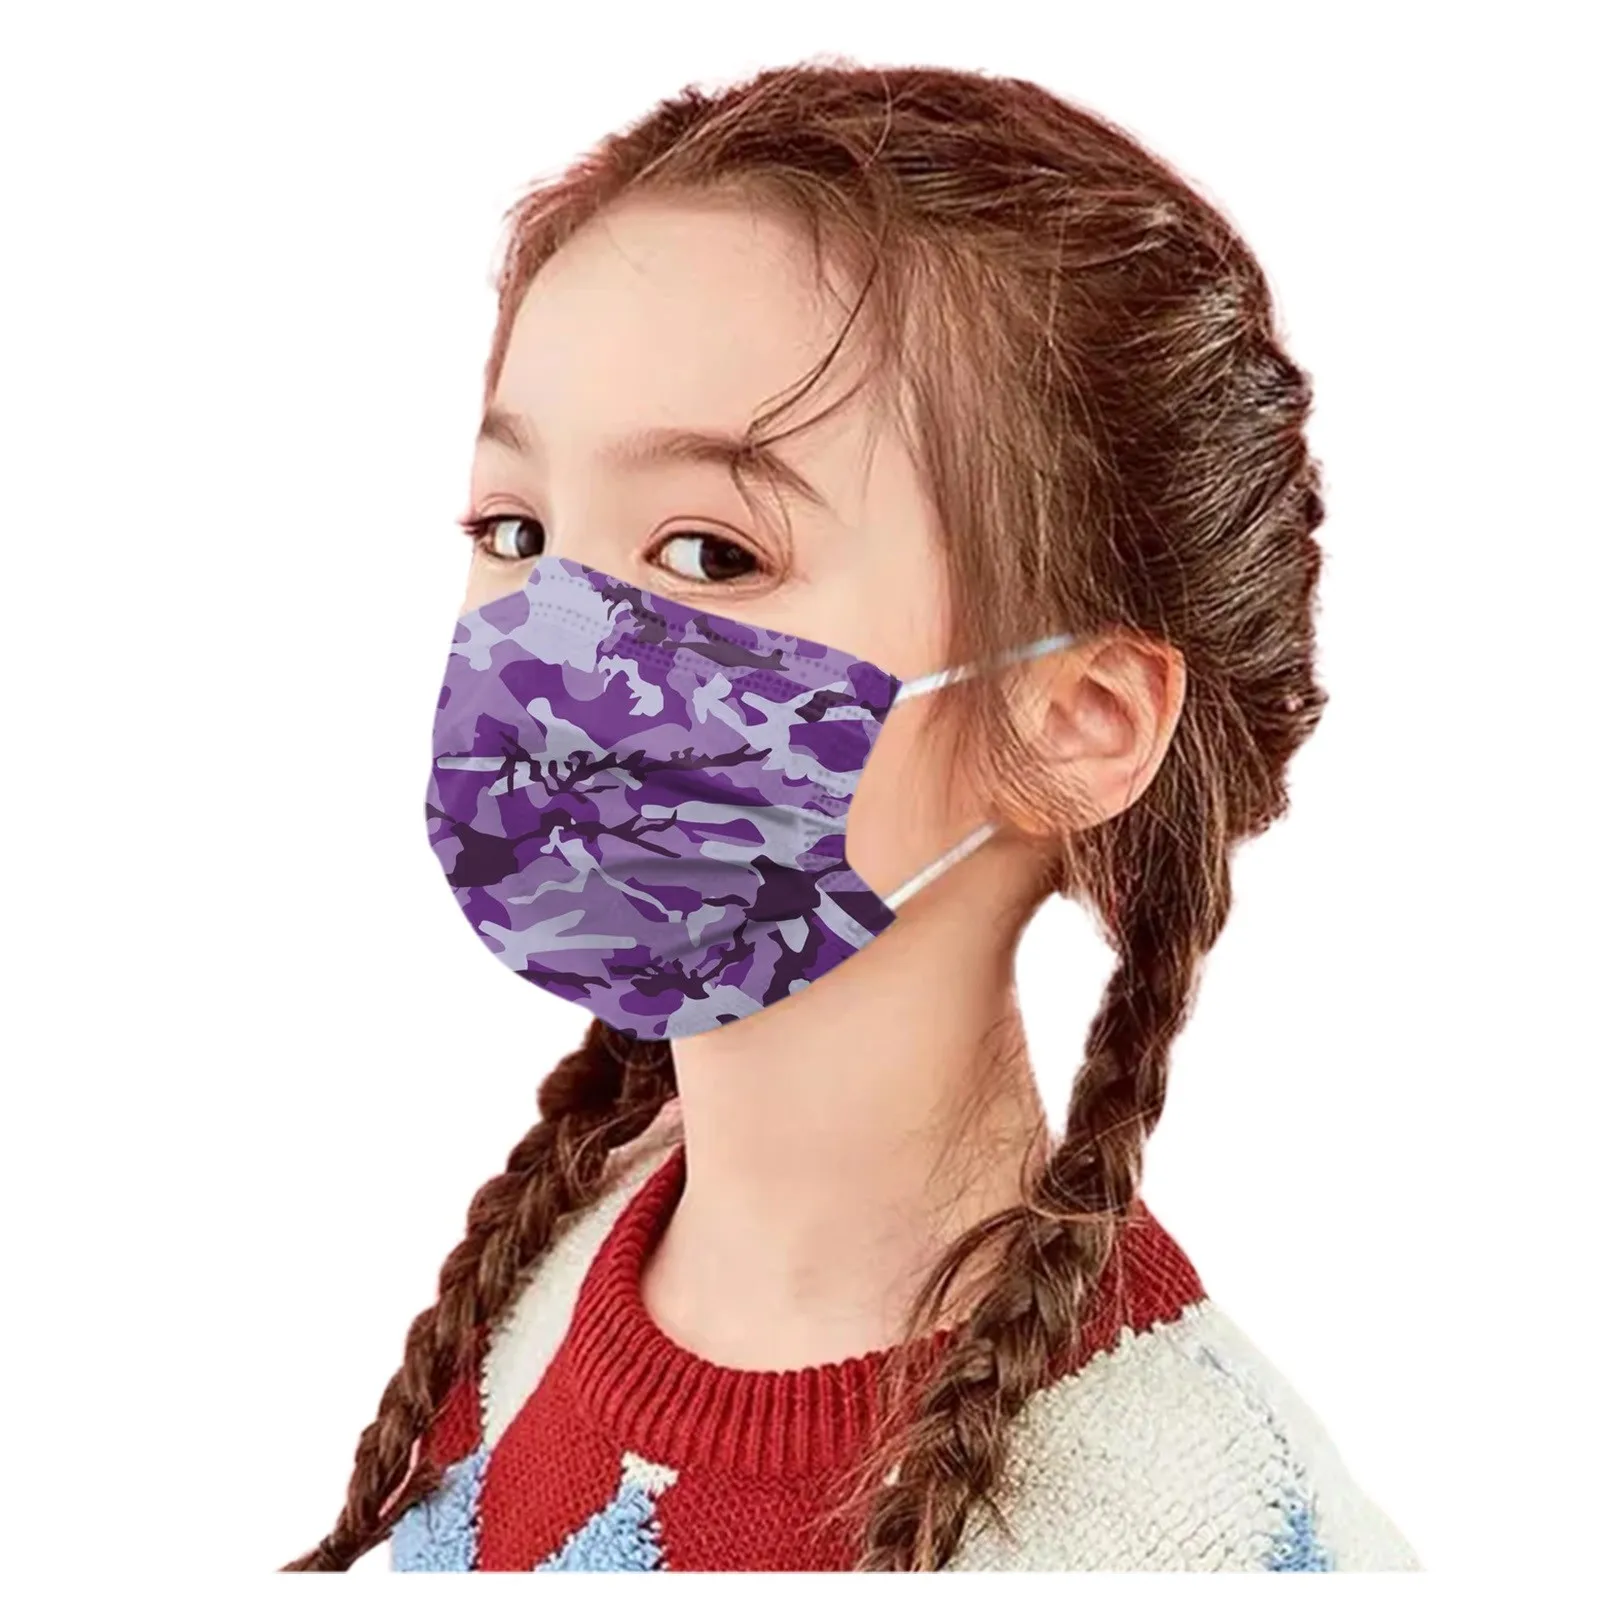 

50PCS Children's Mask Camouflage Print Disposable Face Mask 3Ply Ear Loop Face Cover face shield Masque maseczki ochronne